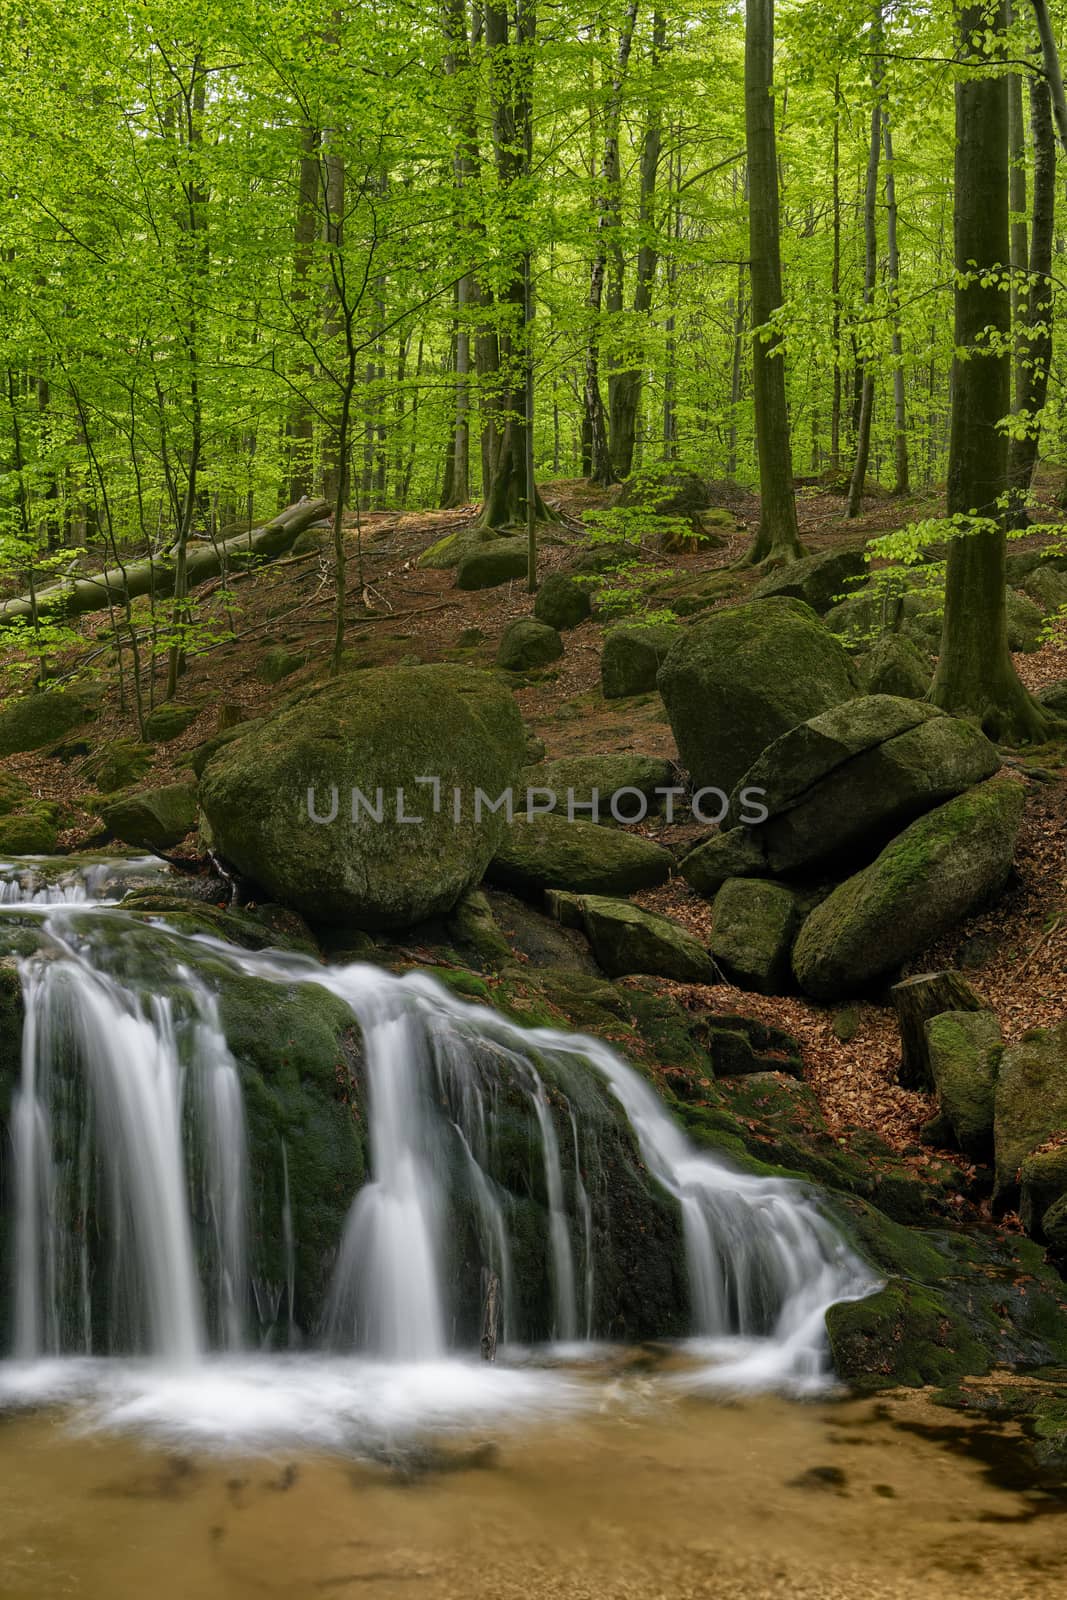 Beautiful Maly waterfall in super green spring forest surroundings, Czech Republic